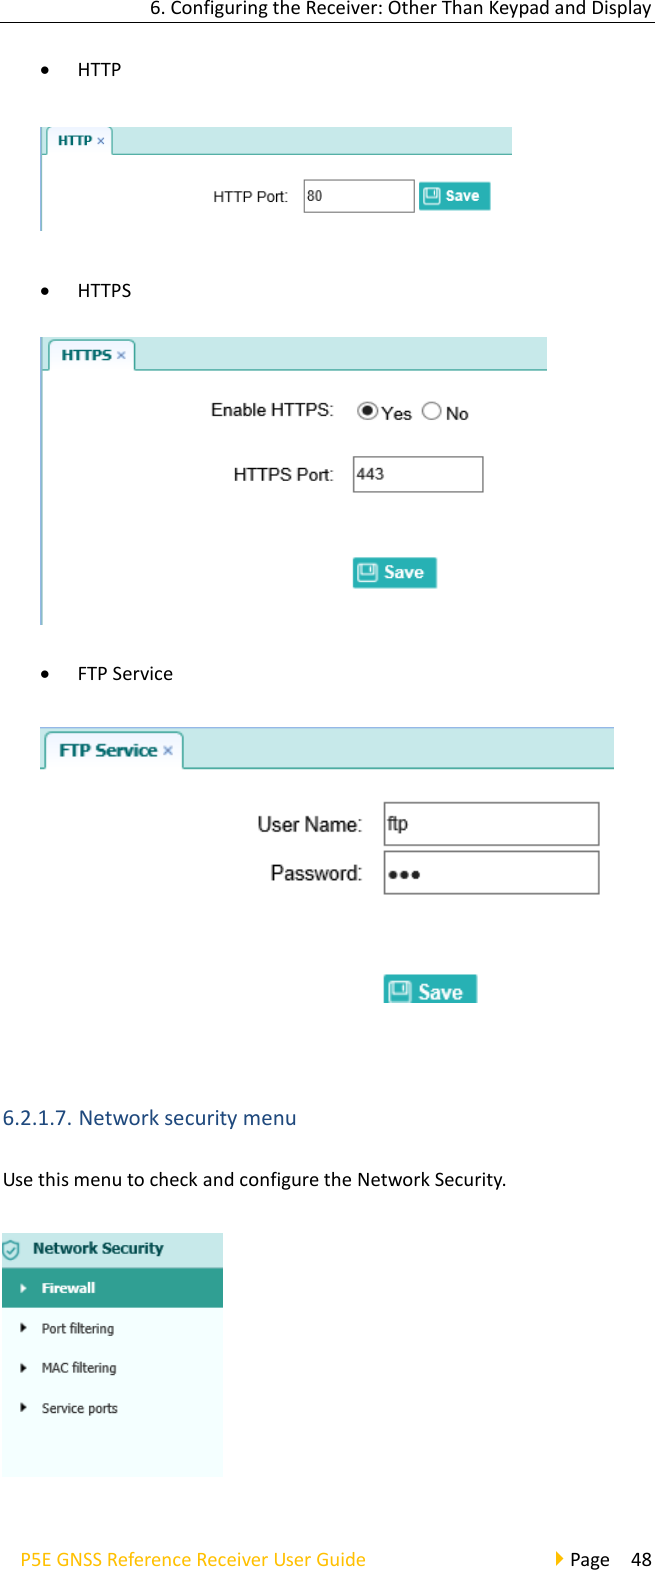 6. Configuring the Receiver: Other Than Keypad and Display P5E GNSS Reference Receiver User Guide                                     Page  48 • HTTP  • HTTPS  • FTP Service   6.2.1.7. Network security menu Use this menu to check and configure the Network Security.      